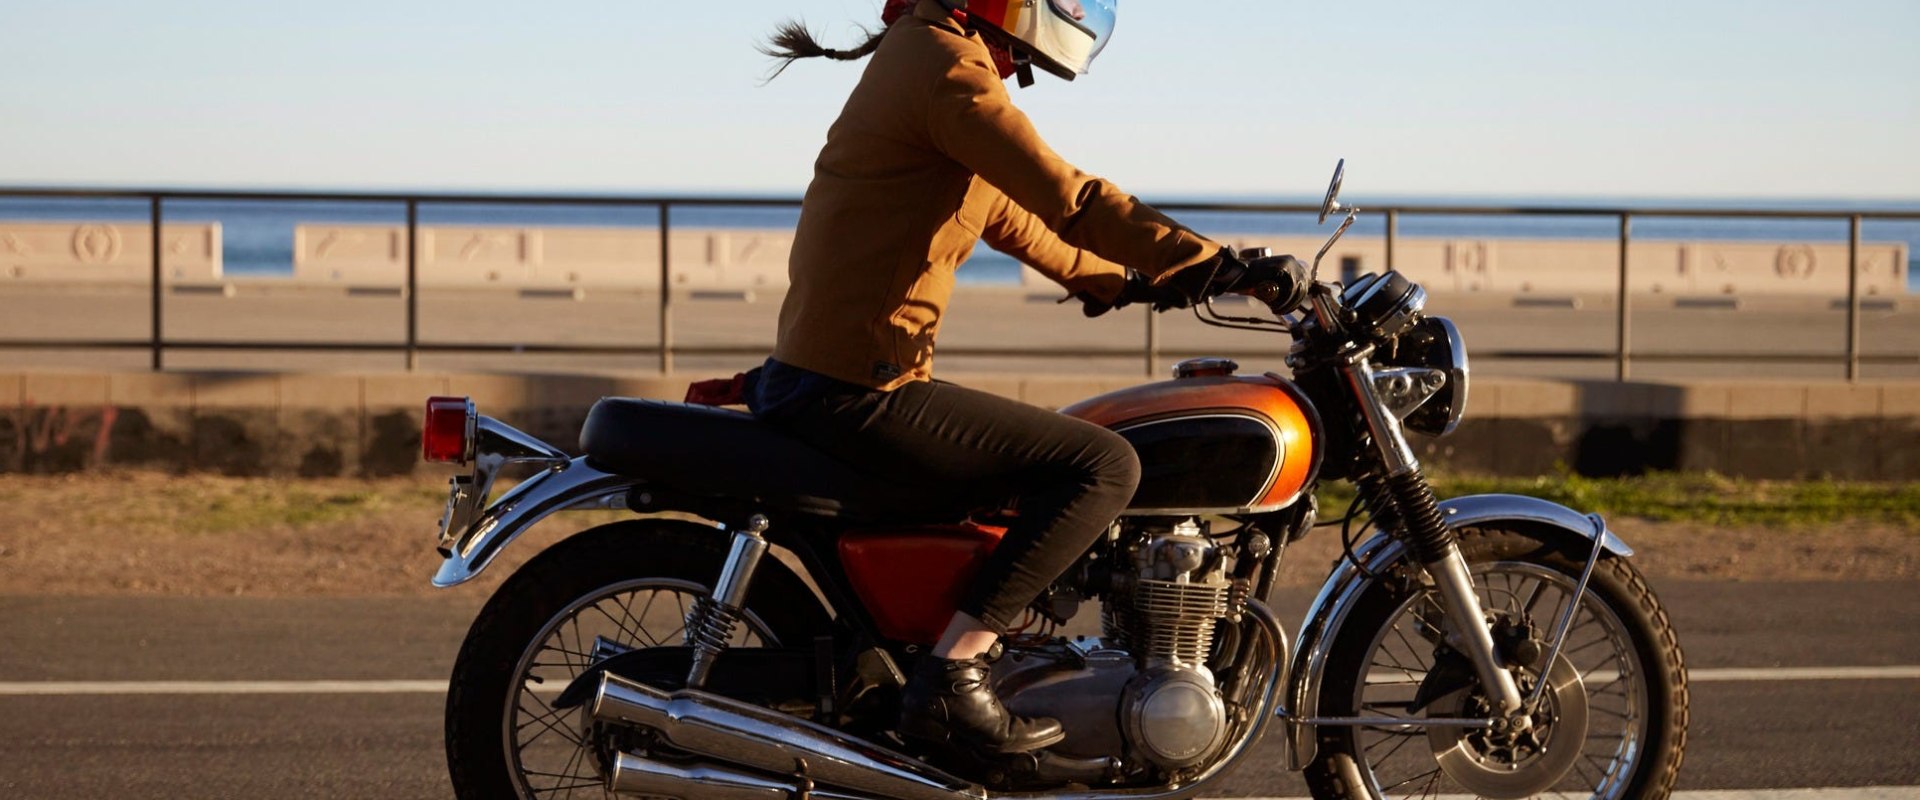 Beginner Motorcycle Insurance for First Time Riders